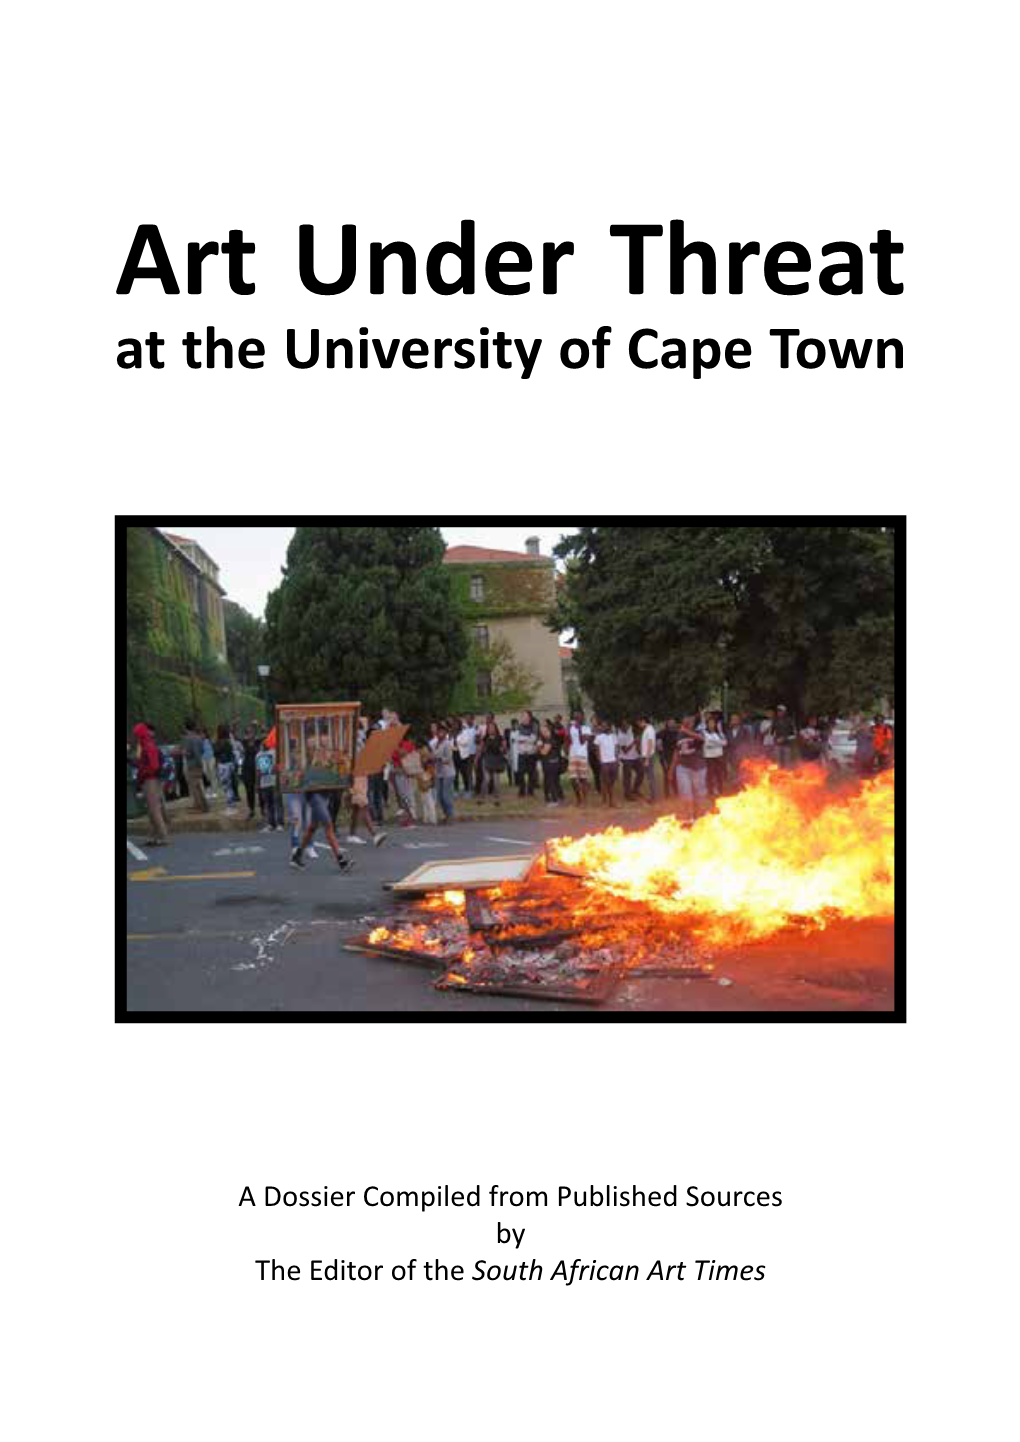 Art Under Threat at the University of Cape Town